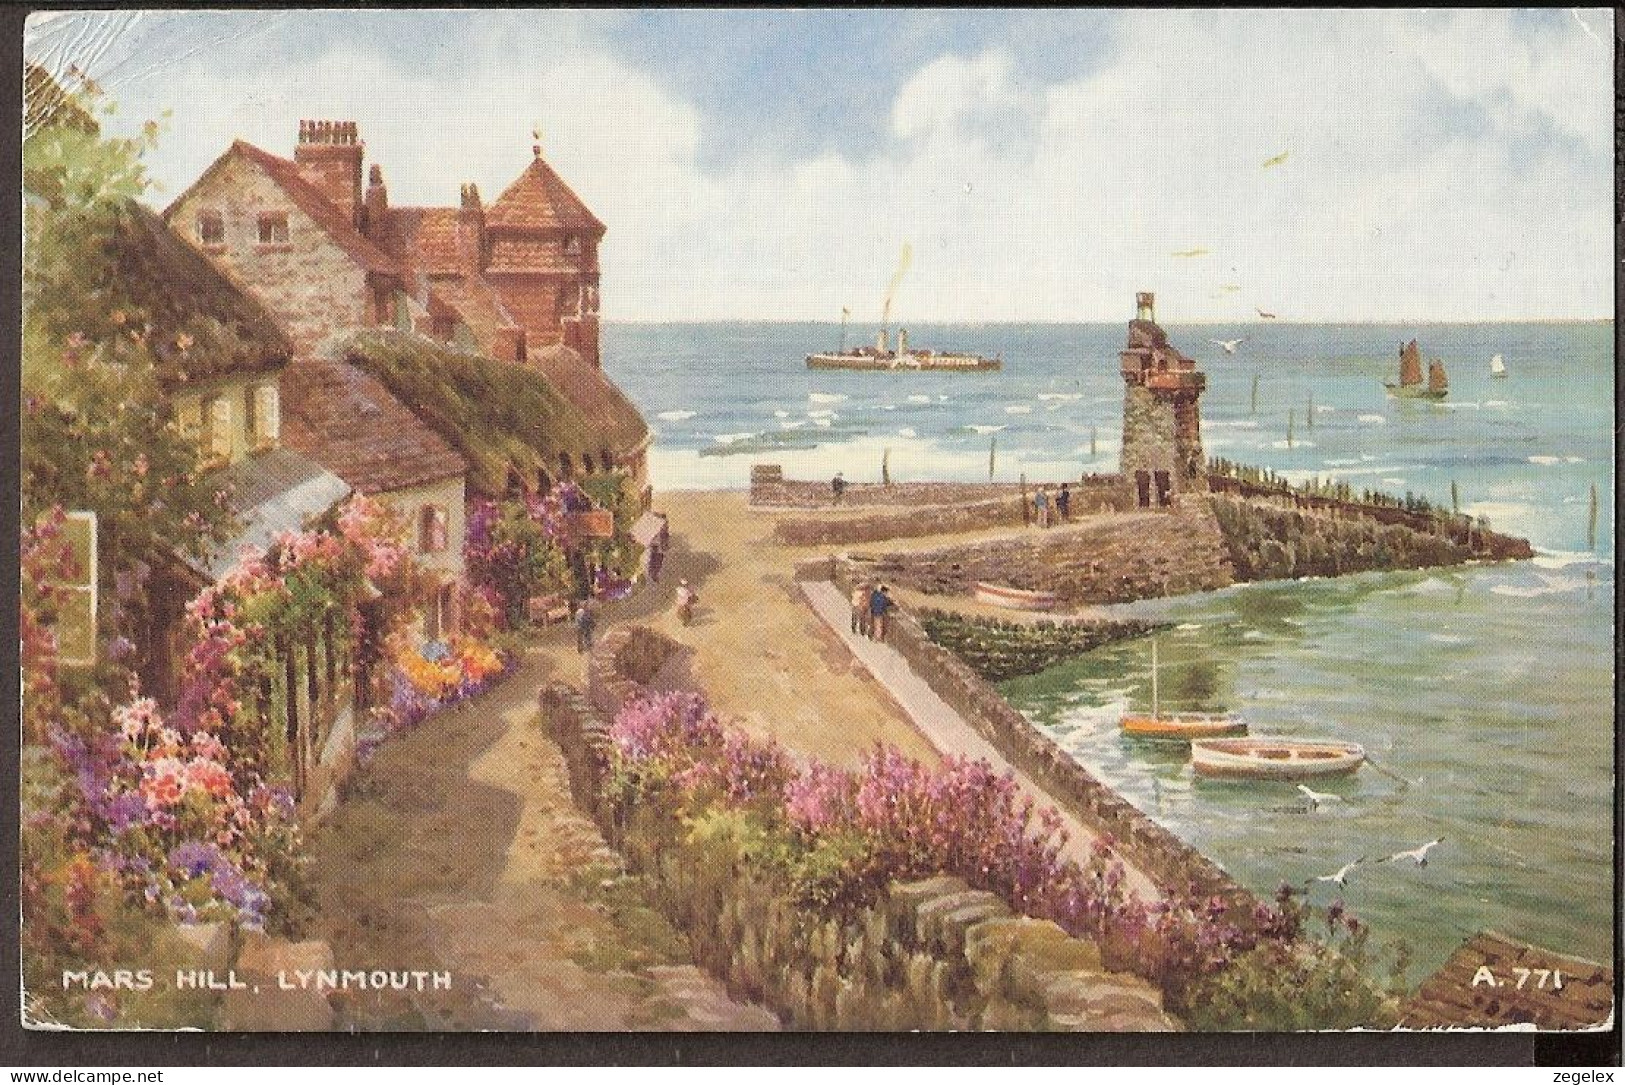 Lynmouth - Mars Hill - Lighthouse? - Paddleboat At Sea - Stamped 'Postoffice Telecom Museum Taunton' - Lynmouth & Lynton